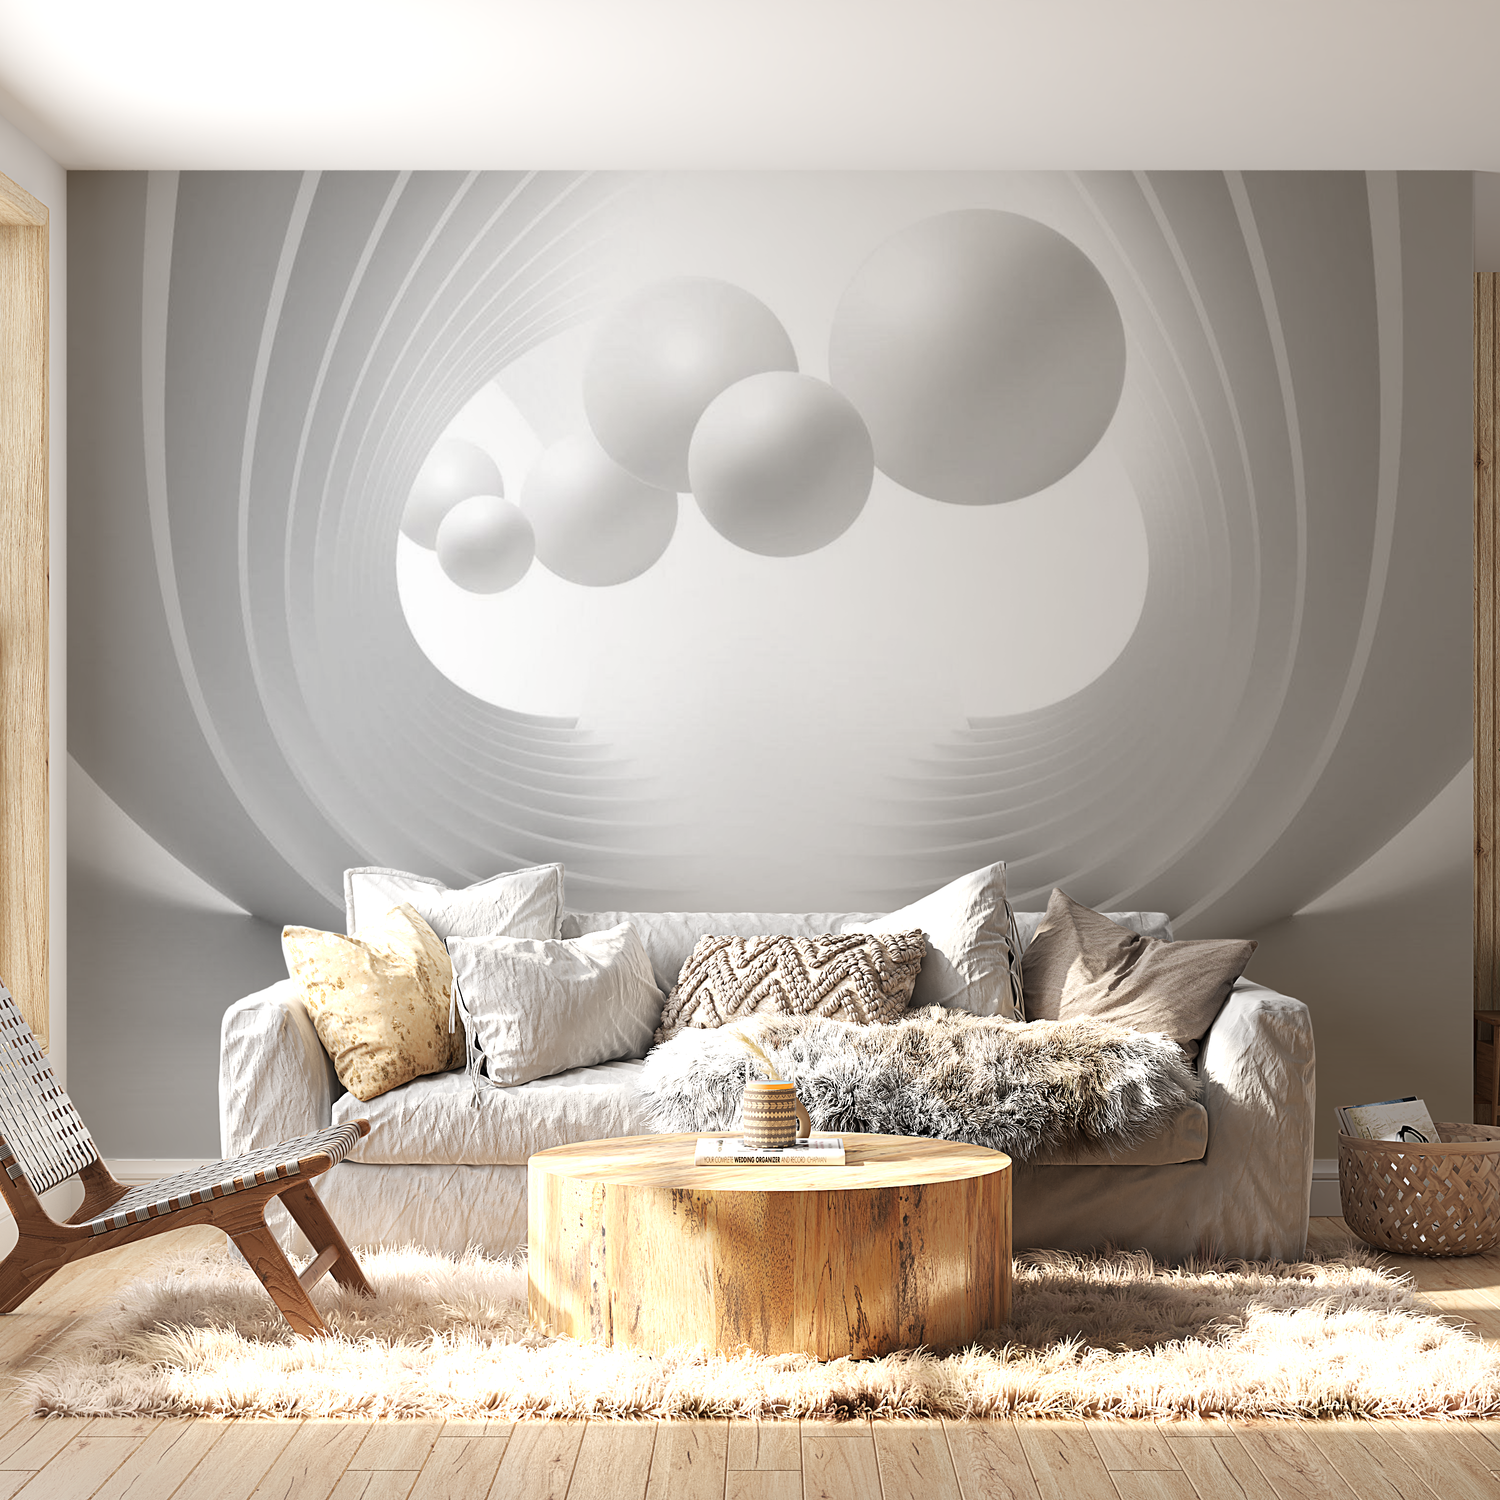 3D Illusion Wallpaper Wall Mural - Gate Of Modernity 39"Wx27"H